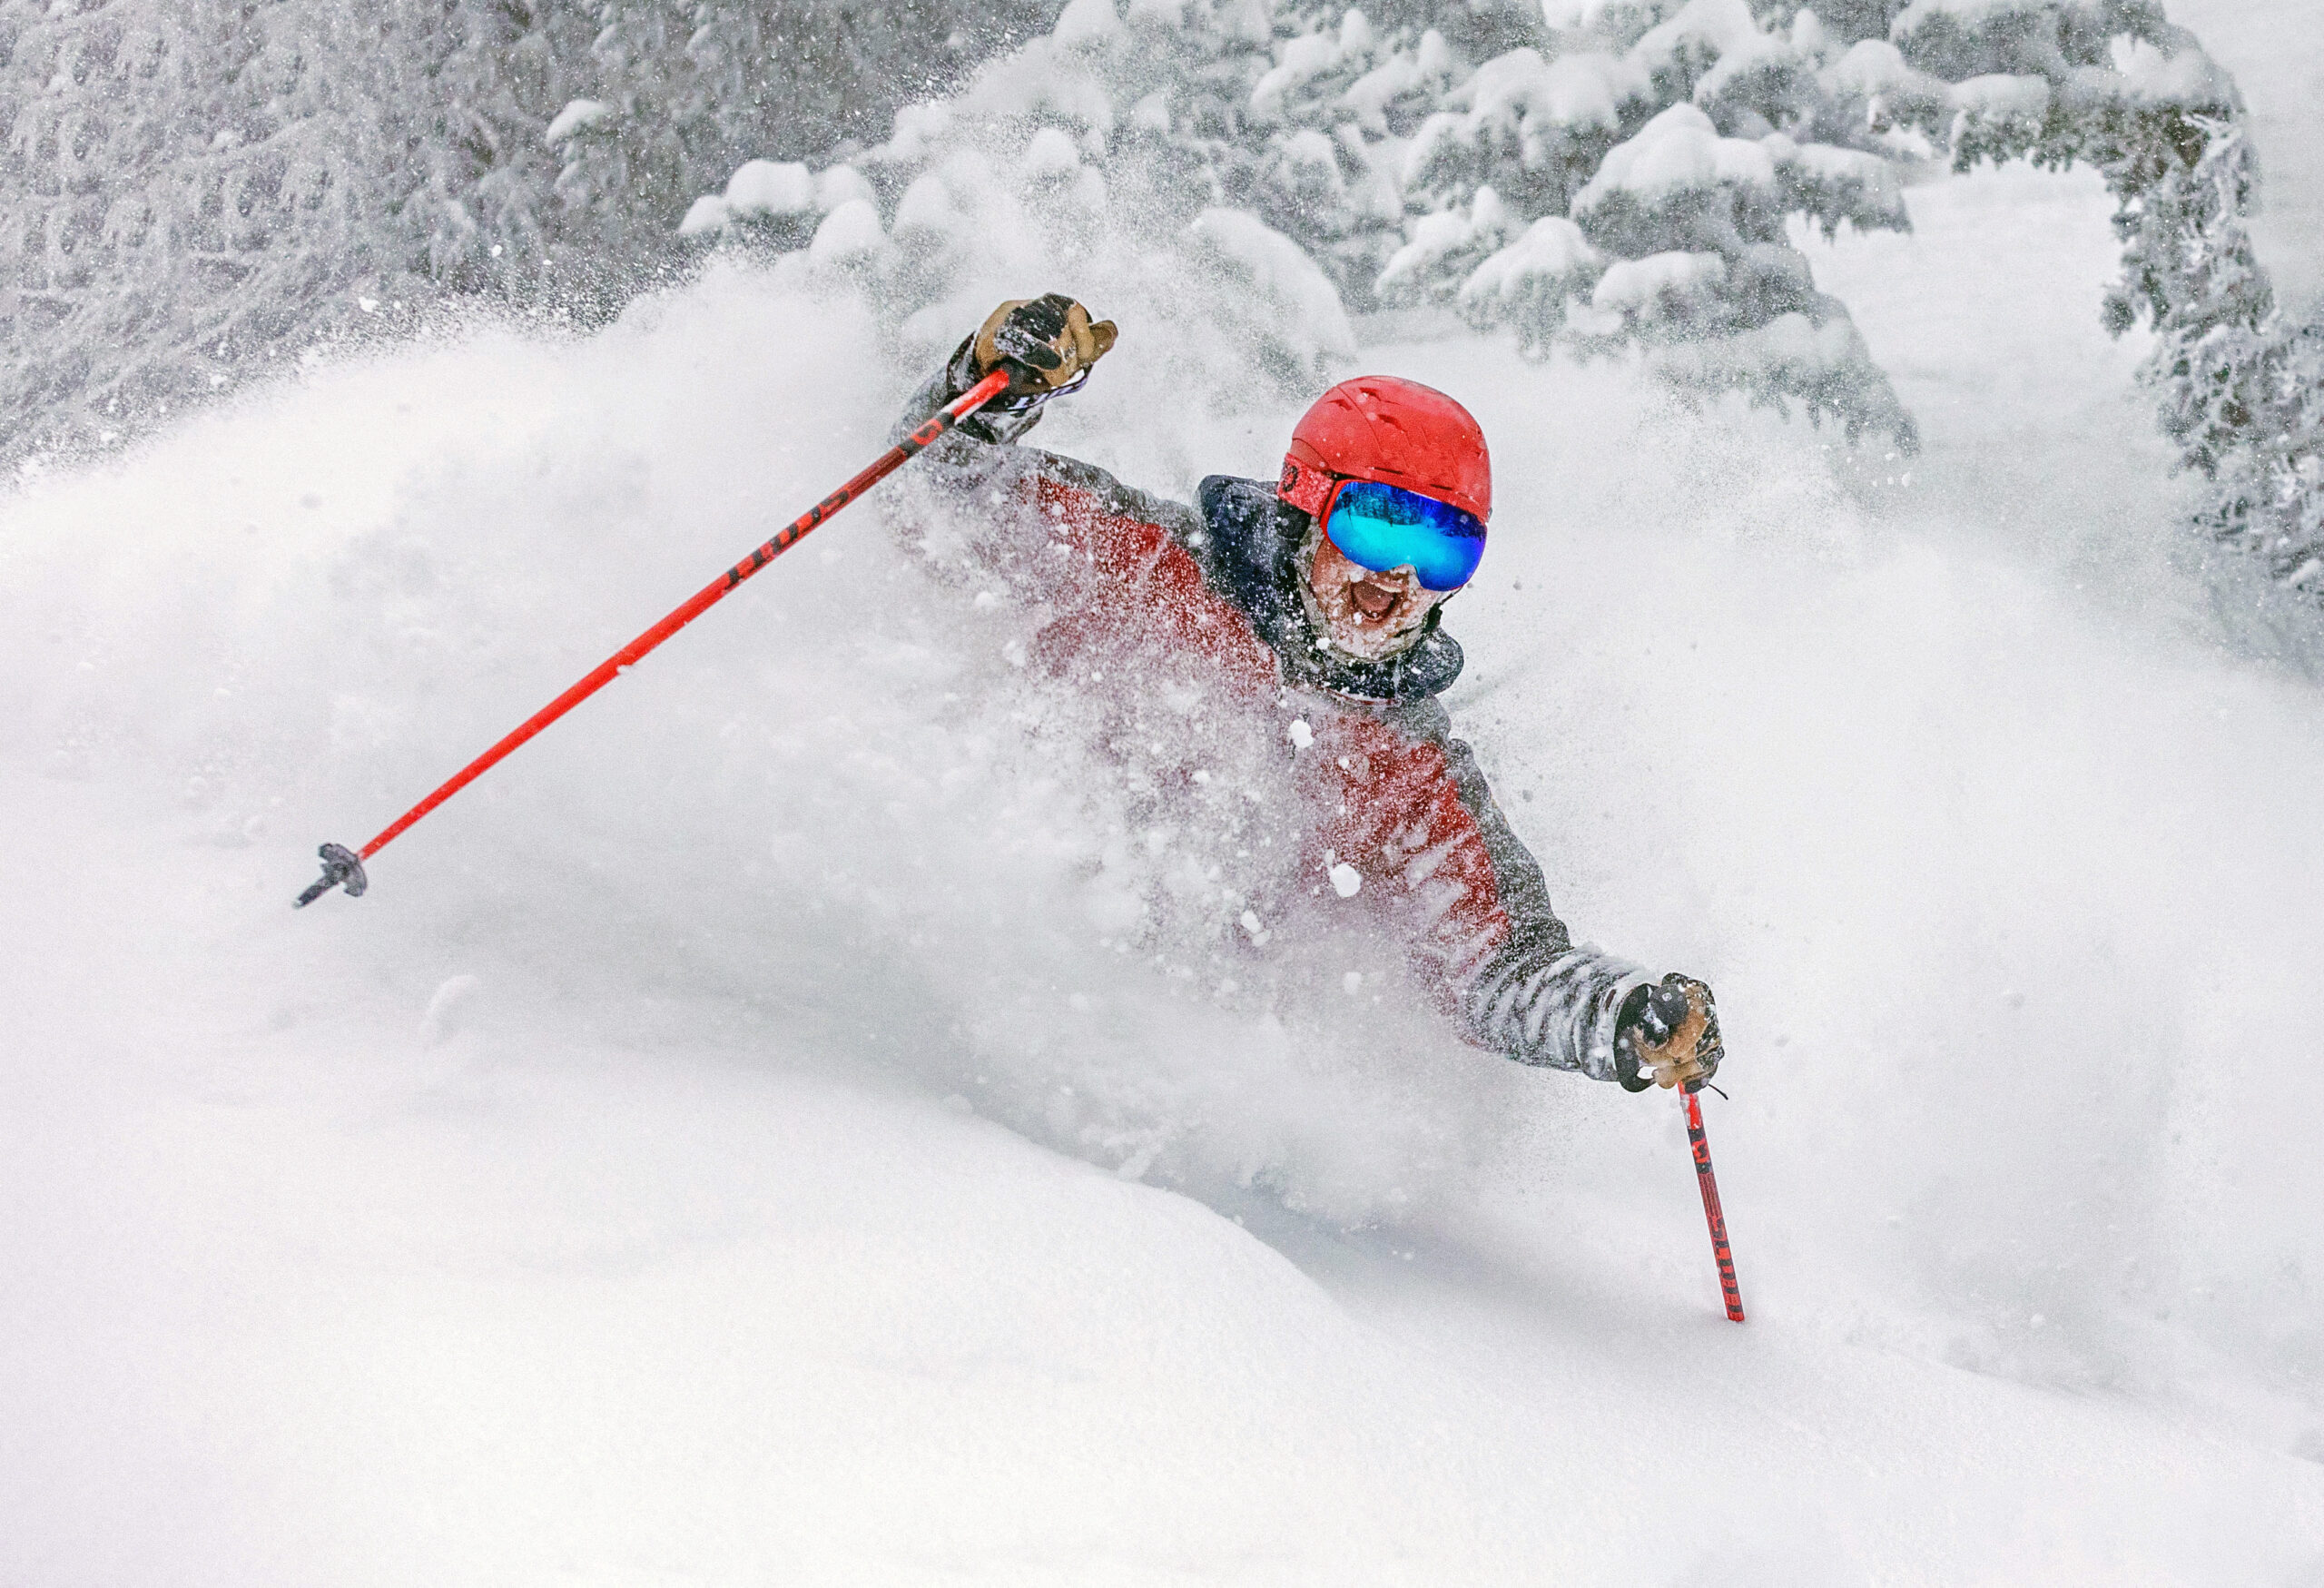 Skier at Mission Ridge in red jacket and helmet smiling during a deep powder turn